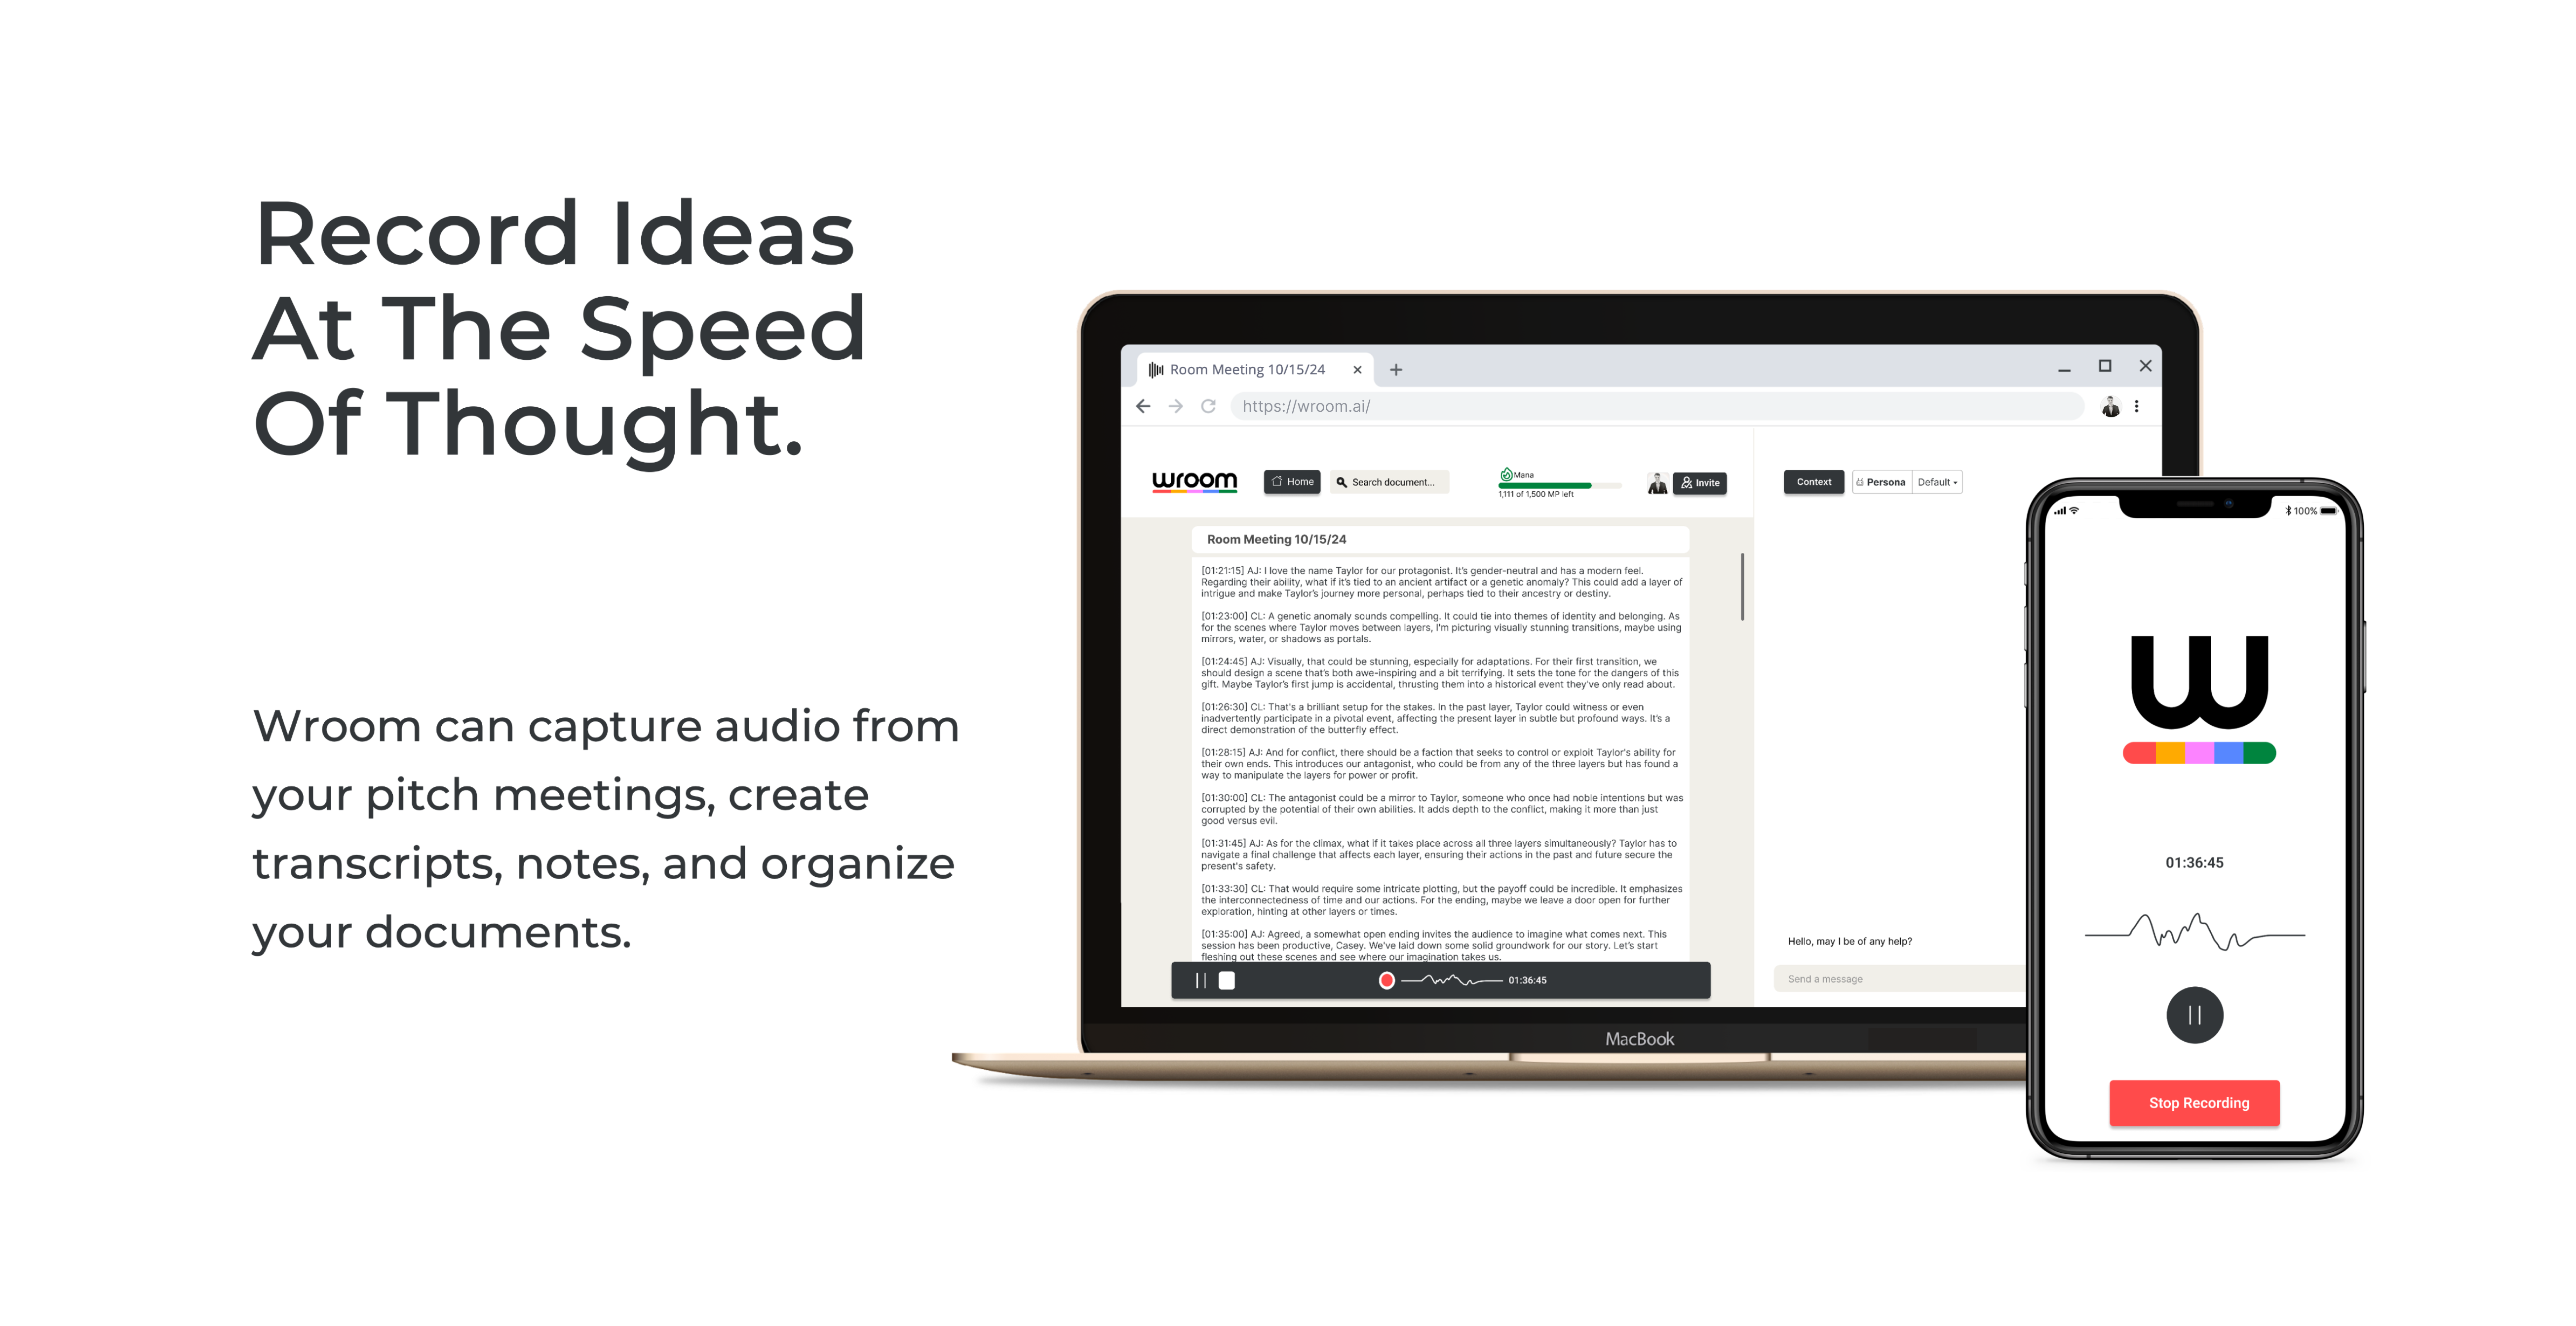 Record Ideas At The Speed Of Thought.

Wroom can capture audio from your pitch meetings, create transcripts, notes, and organize your documents.
